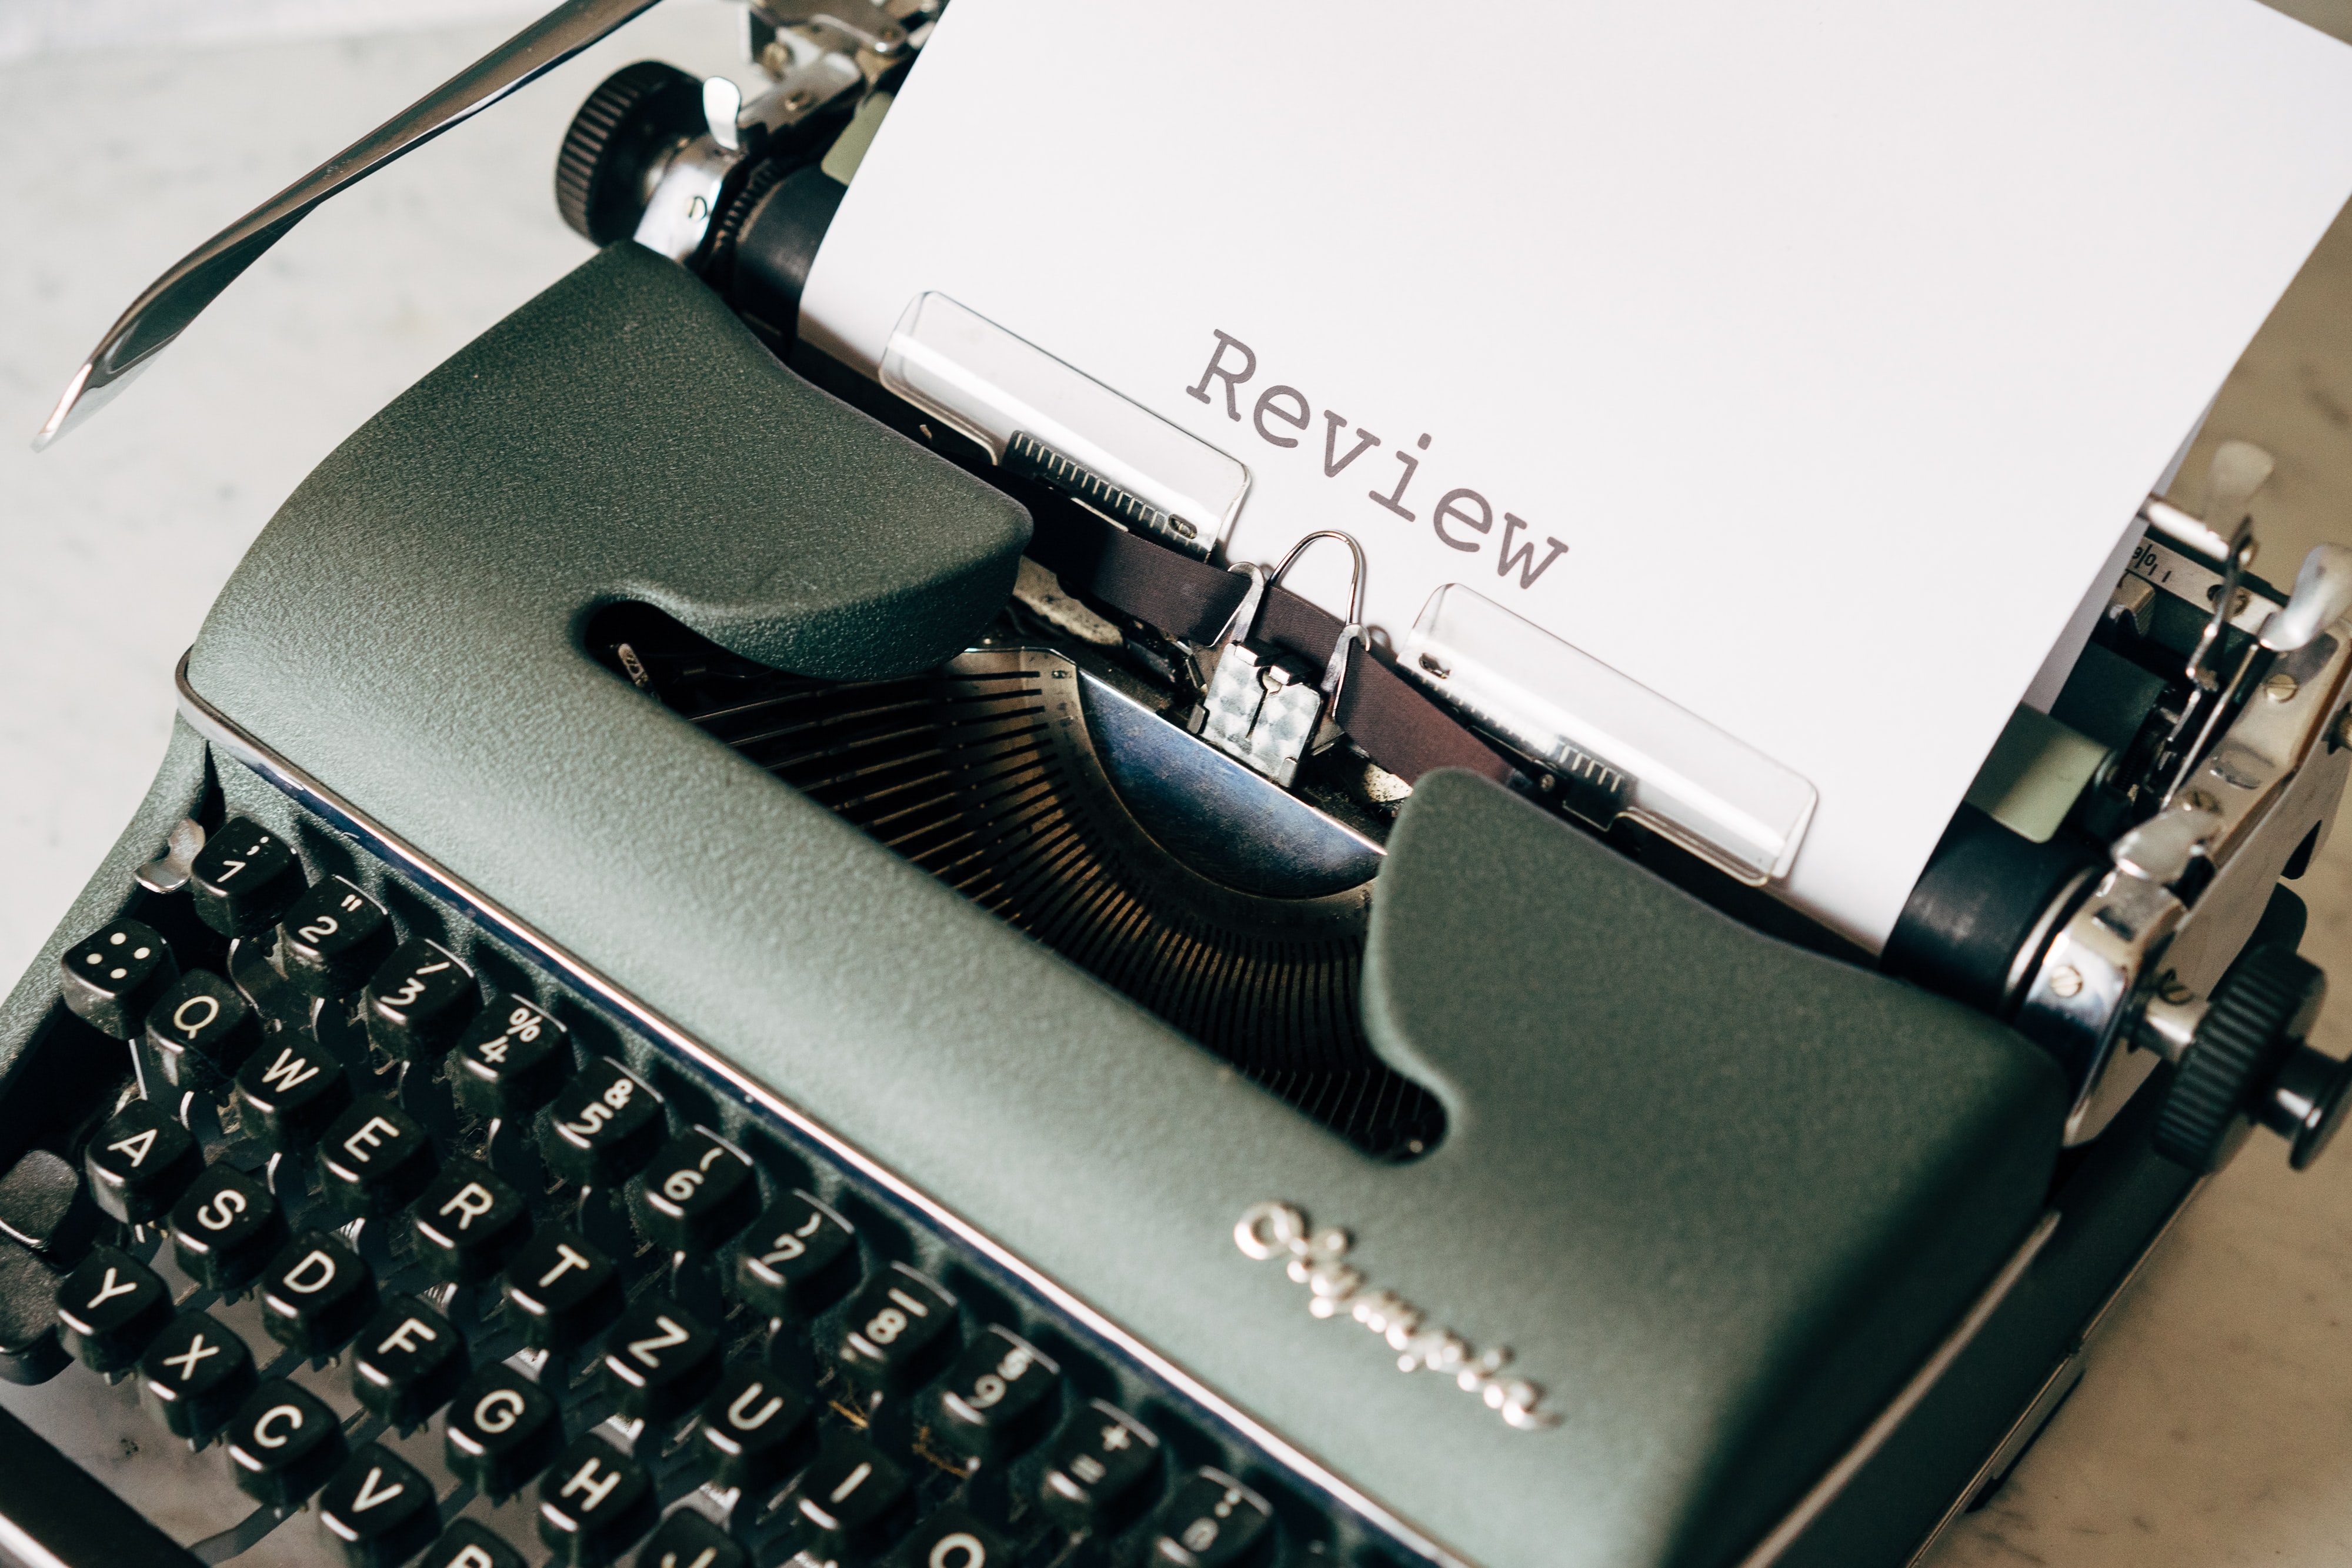 A book review being created on a pretty black typewriter.